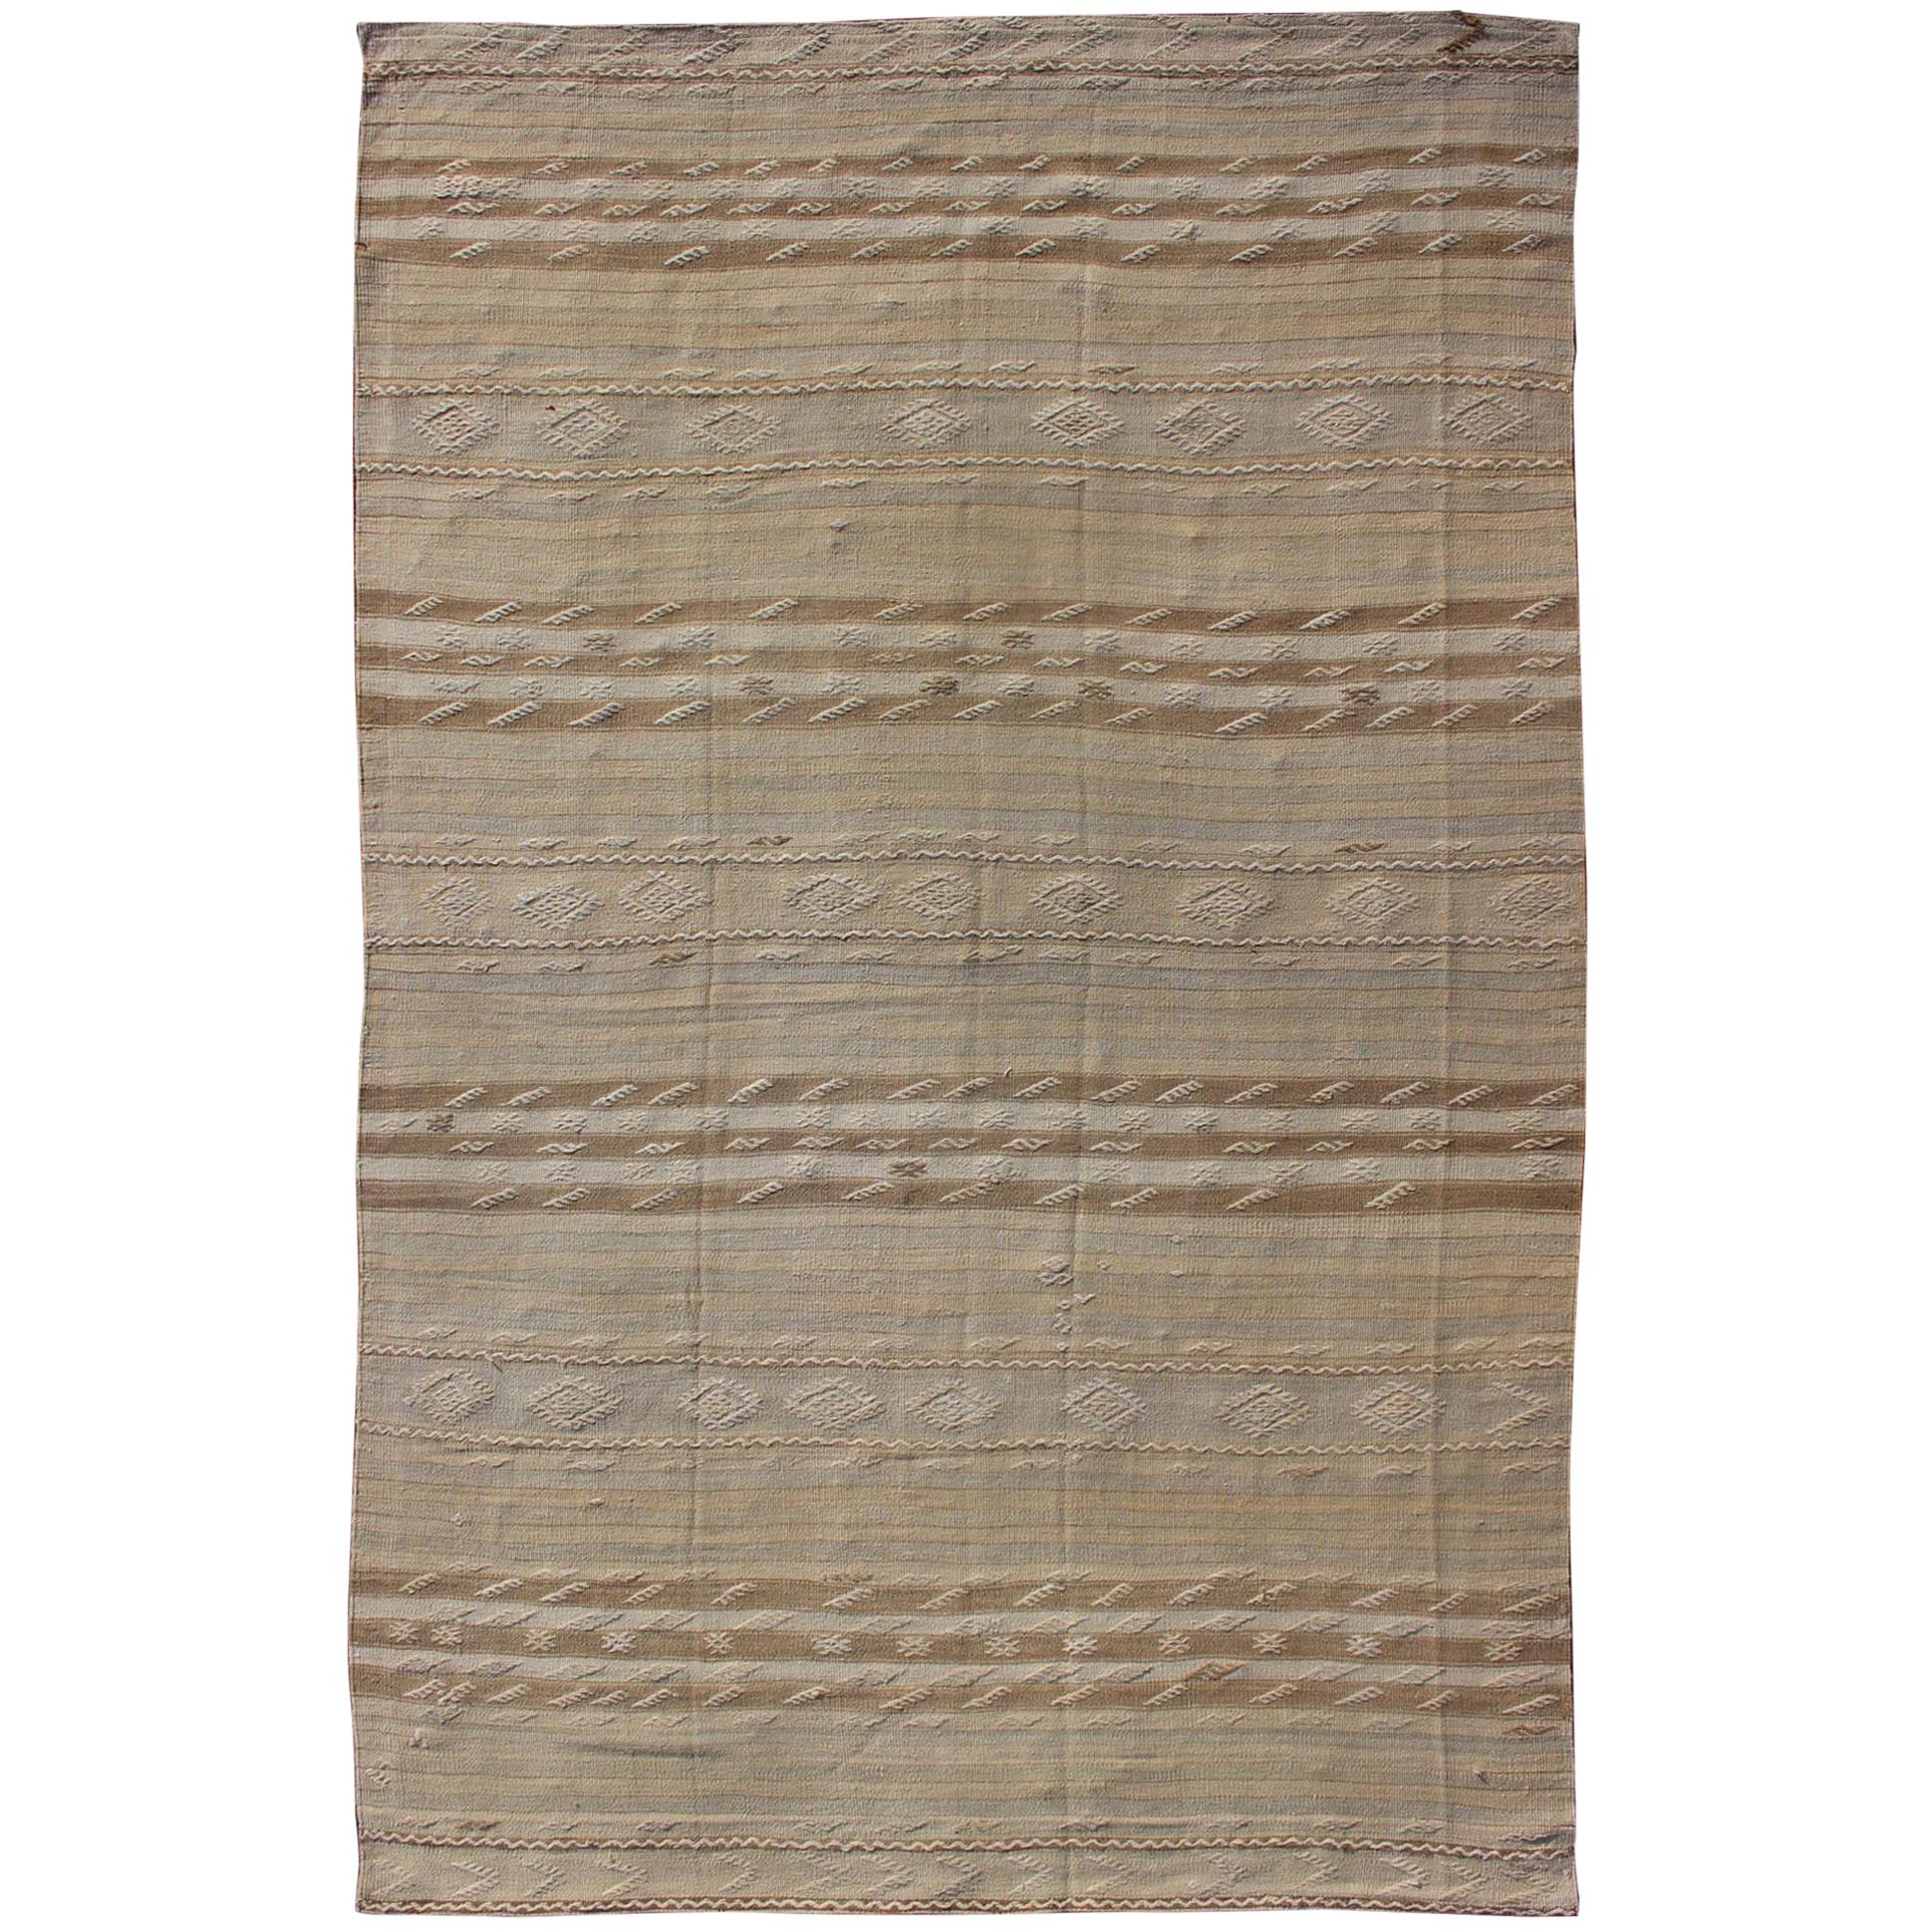 Vintage Turkish Flat-Weave Striped Kilim in Taupe Colors